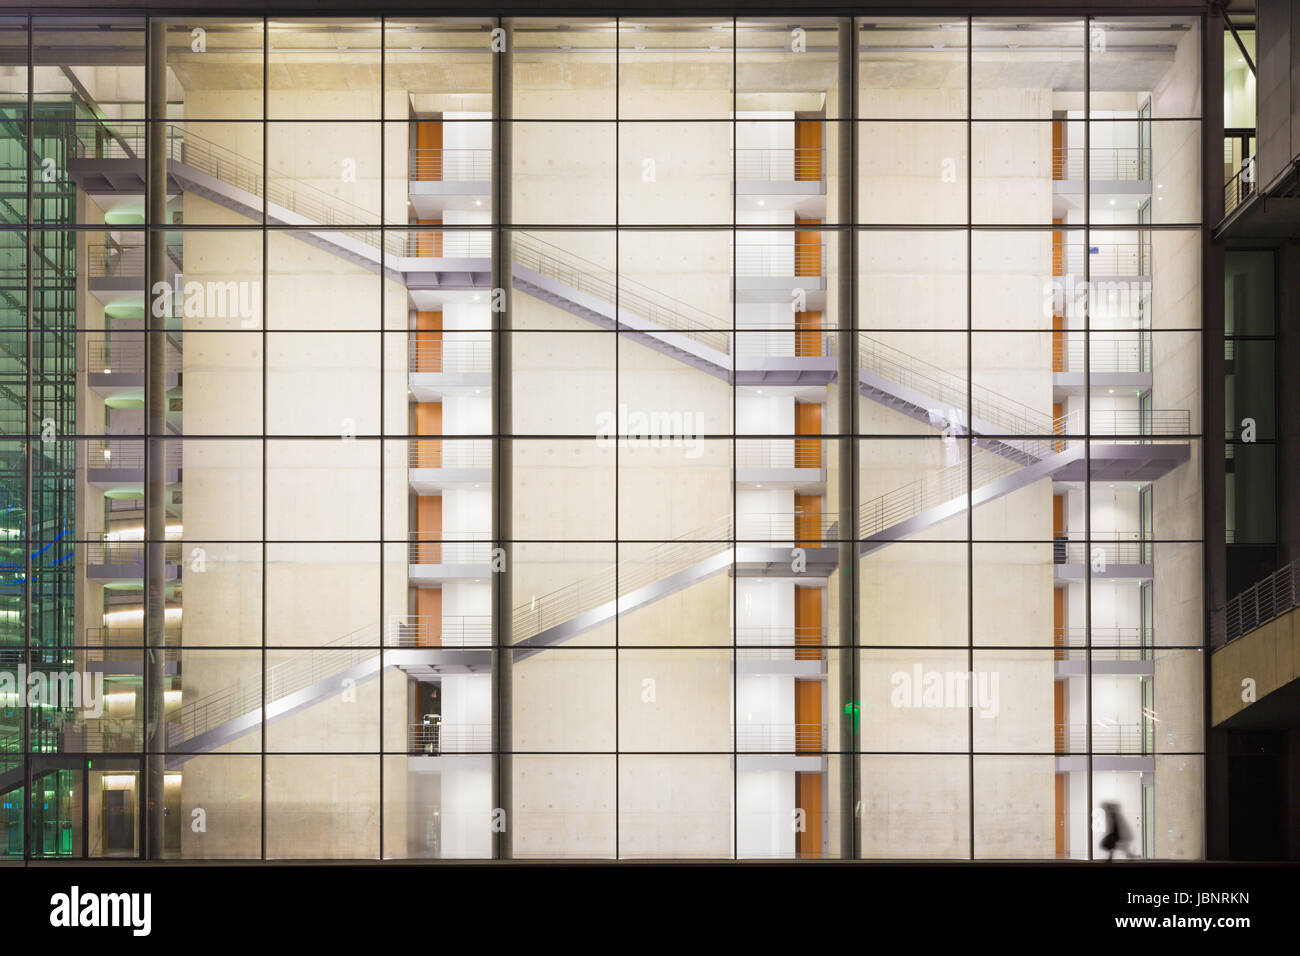 Berlin - The glass facade of modern Government building at night. Stock Photo